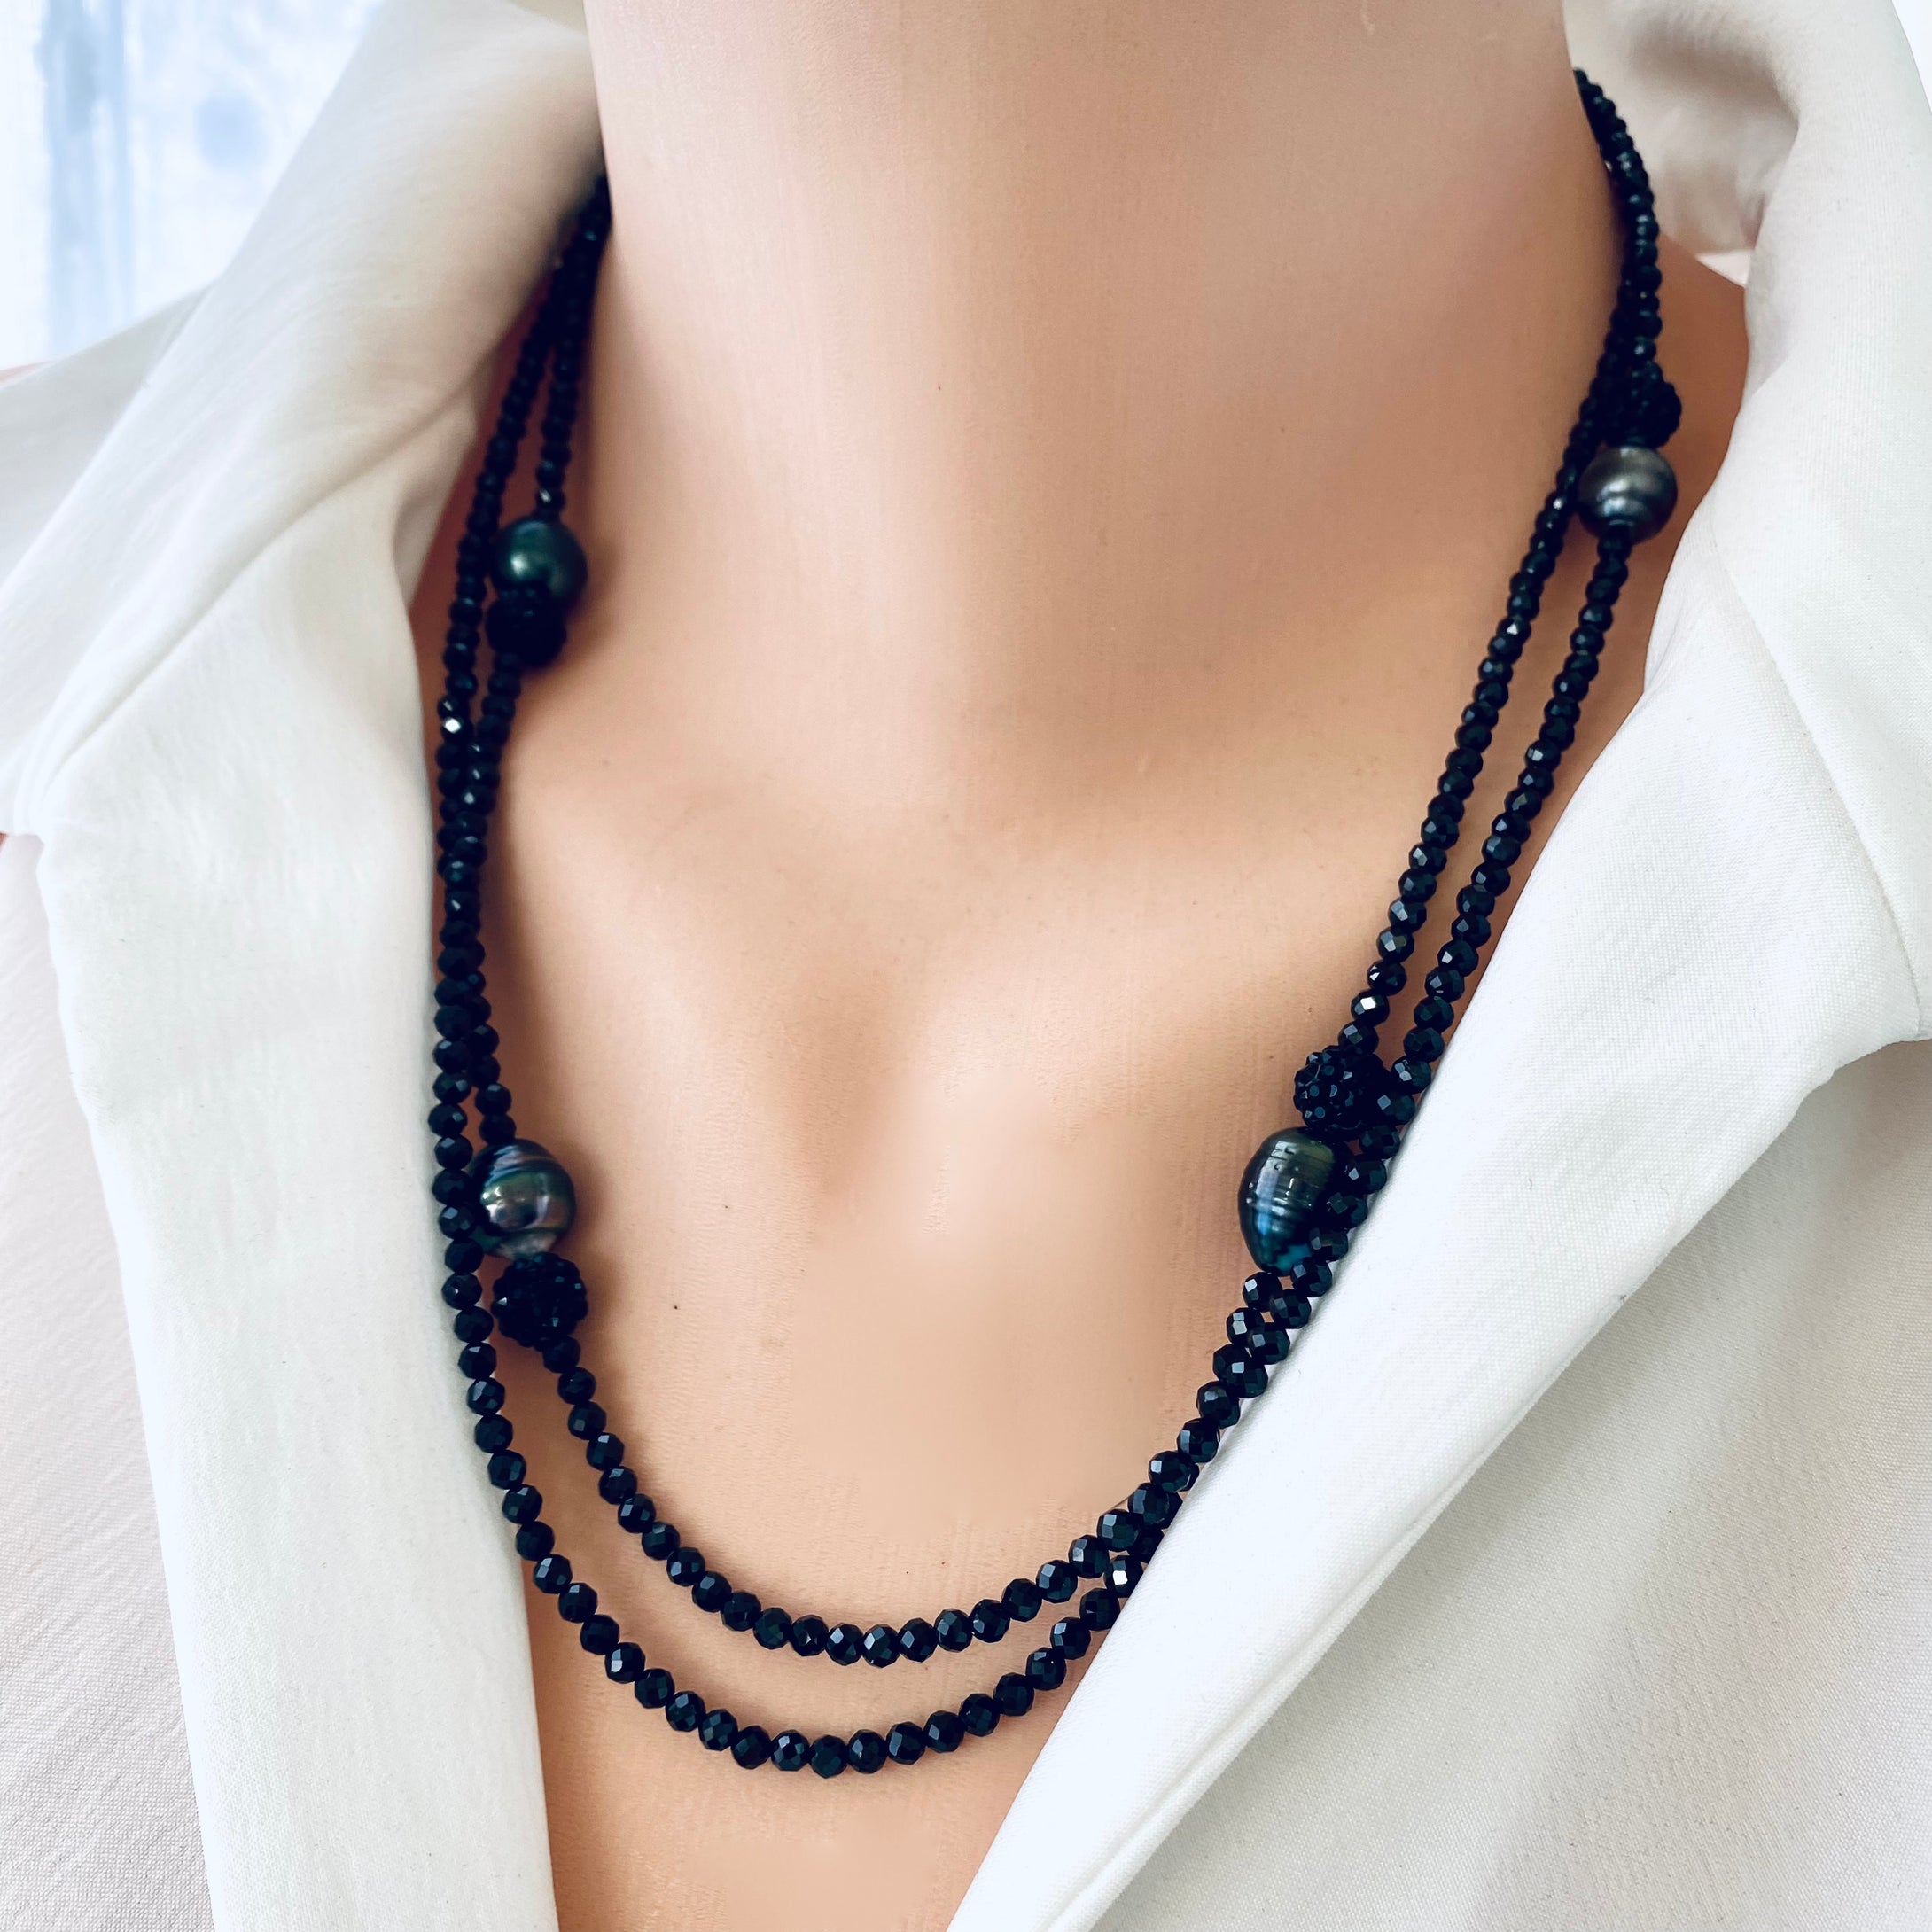 Black Spinel and Tahitian Baroque Pearls Long Beaded Necklace, in 41